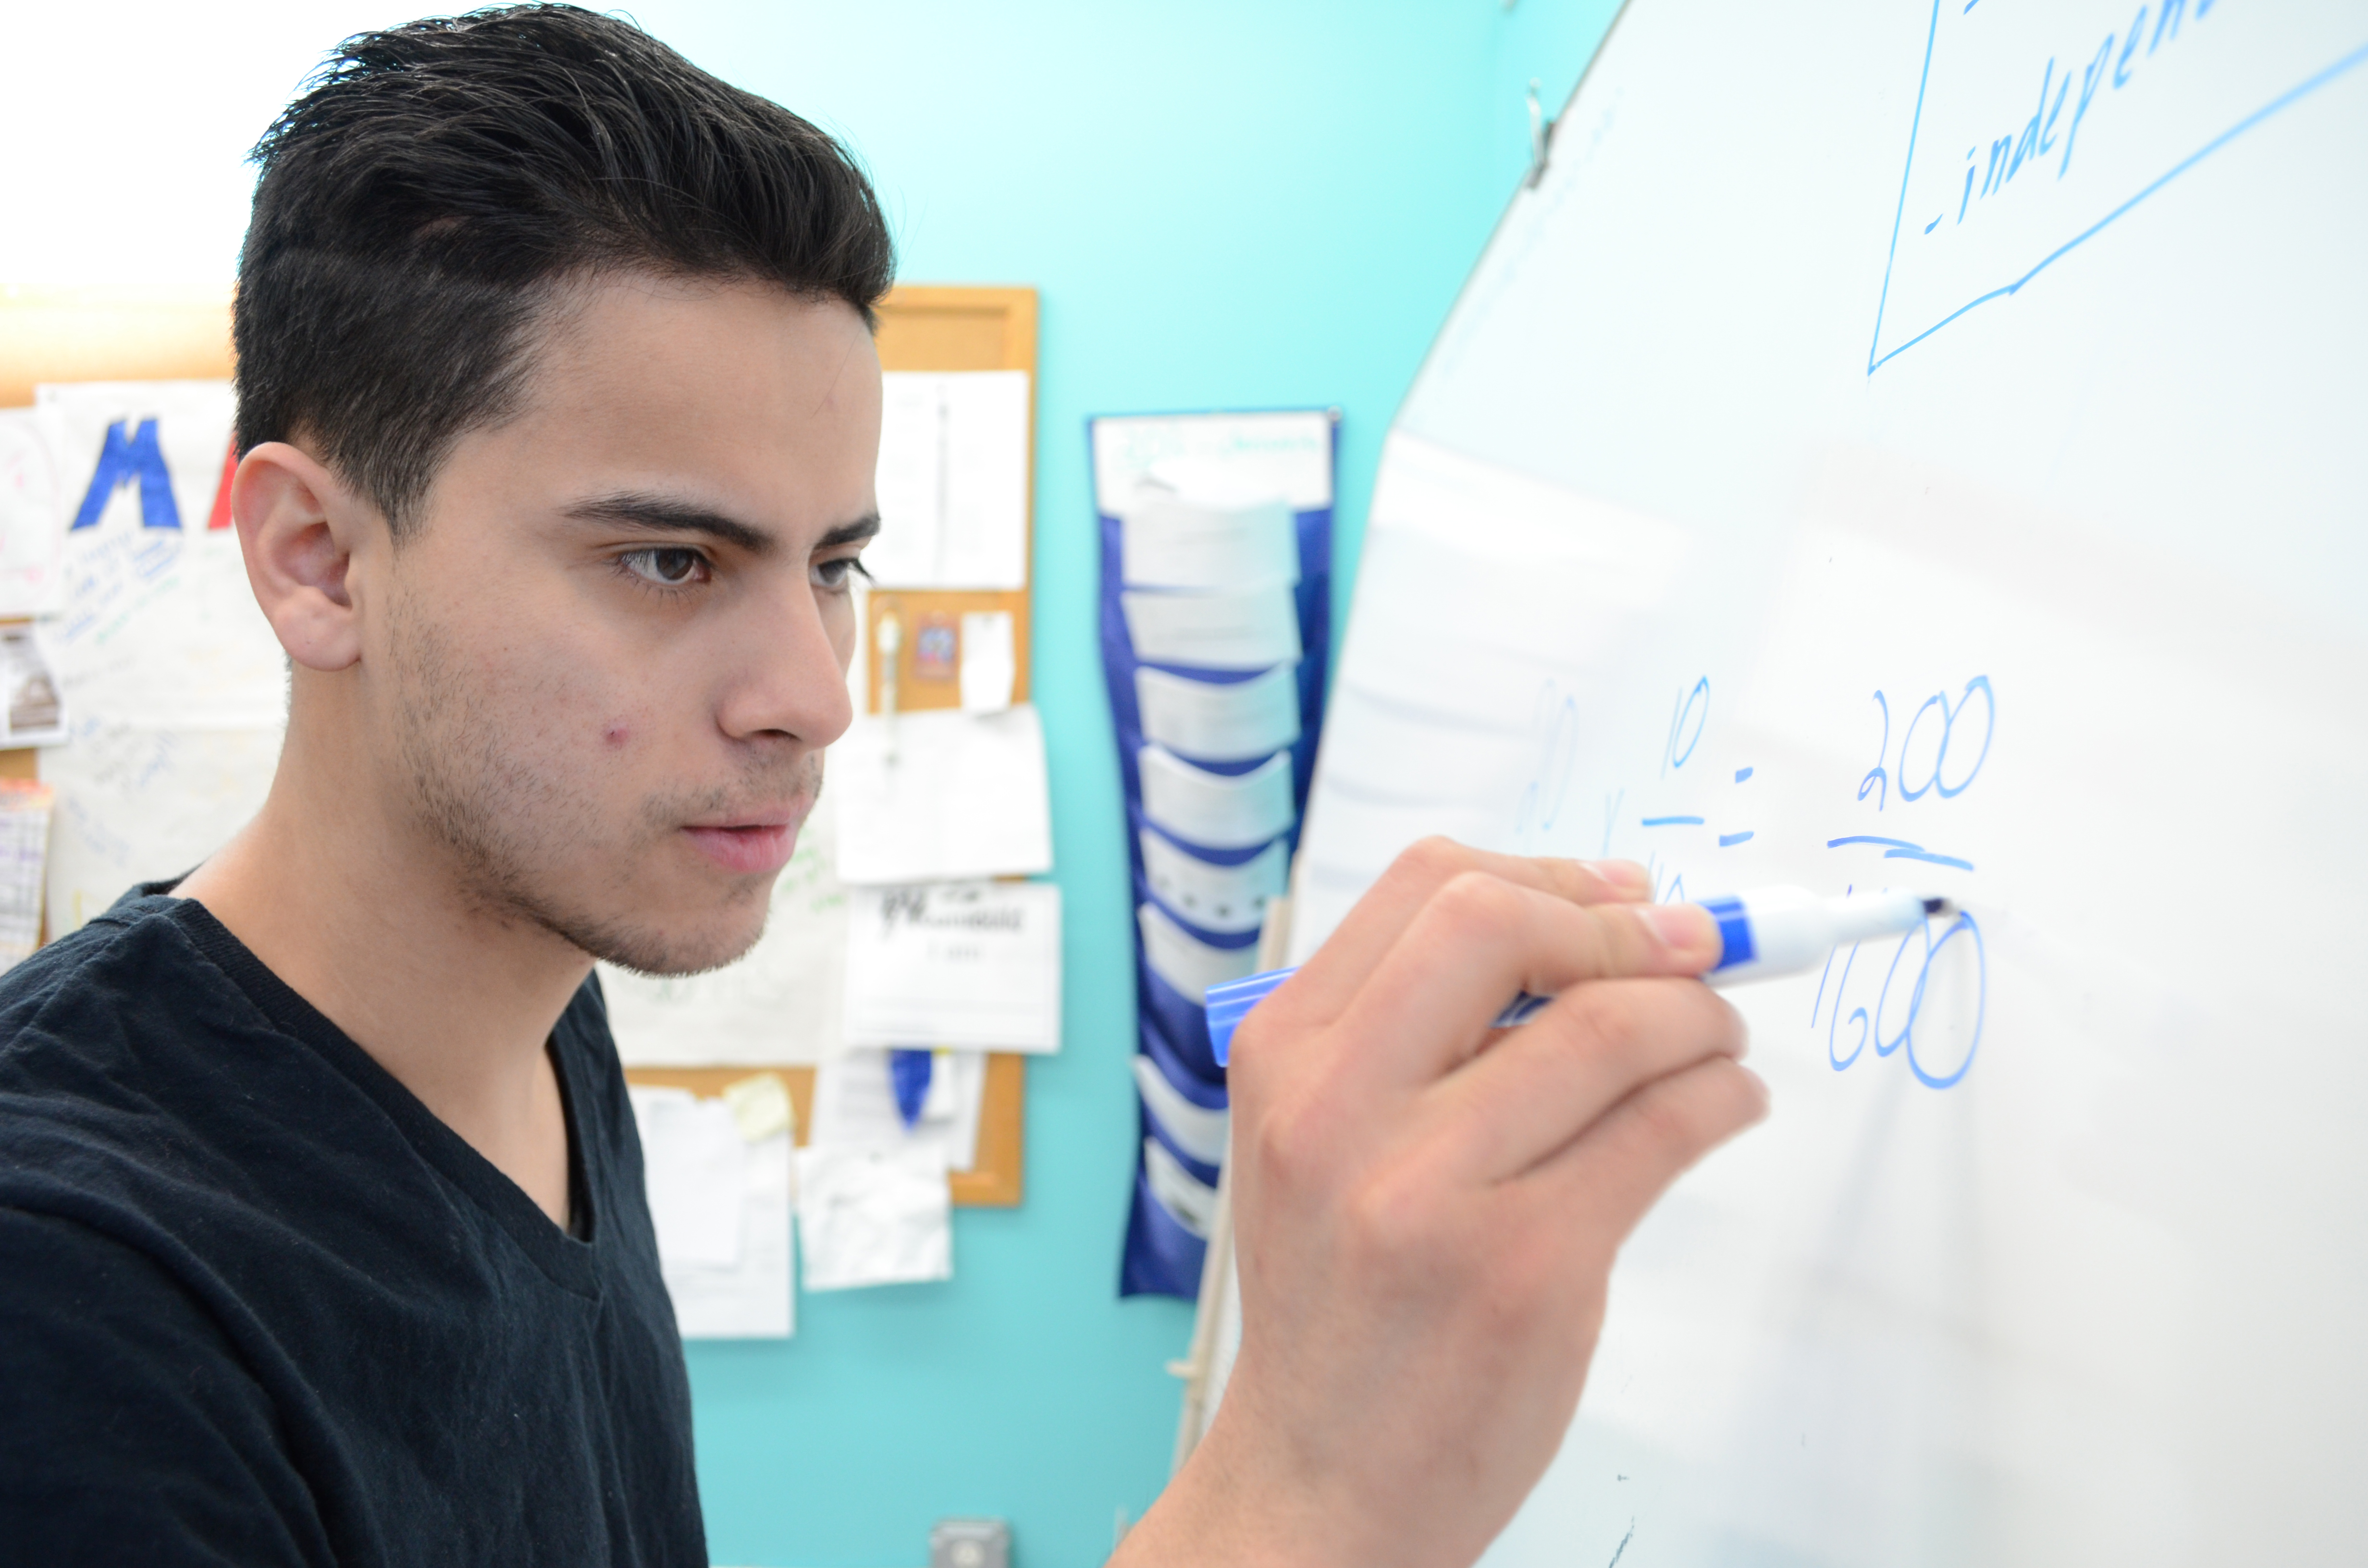 Student at whiteboard completing equation